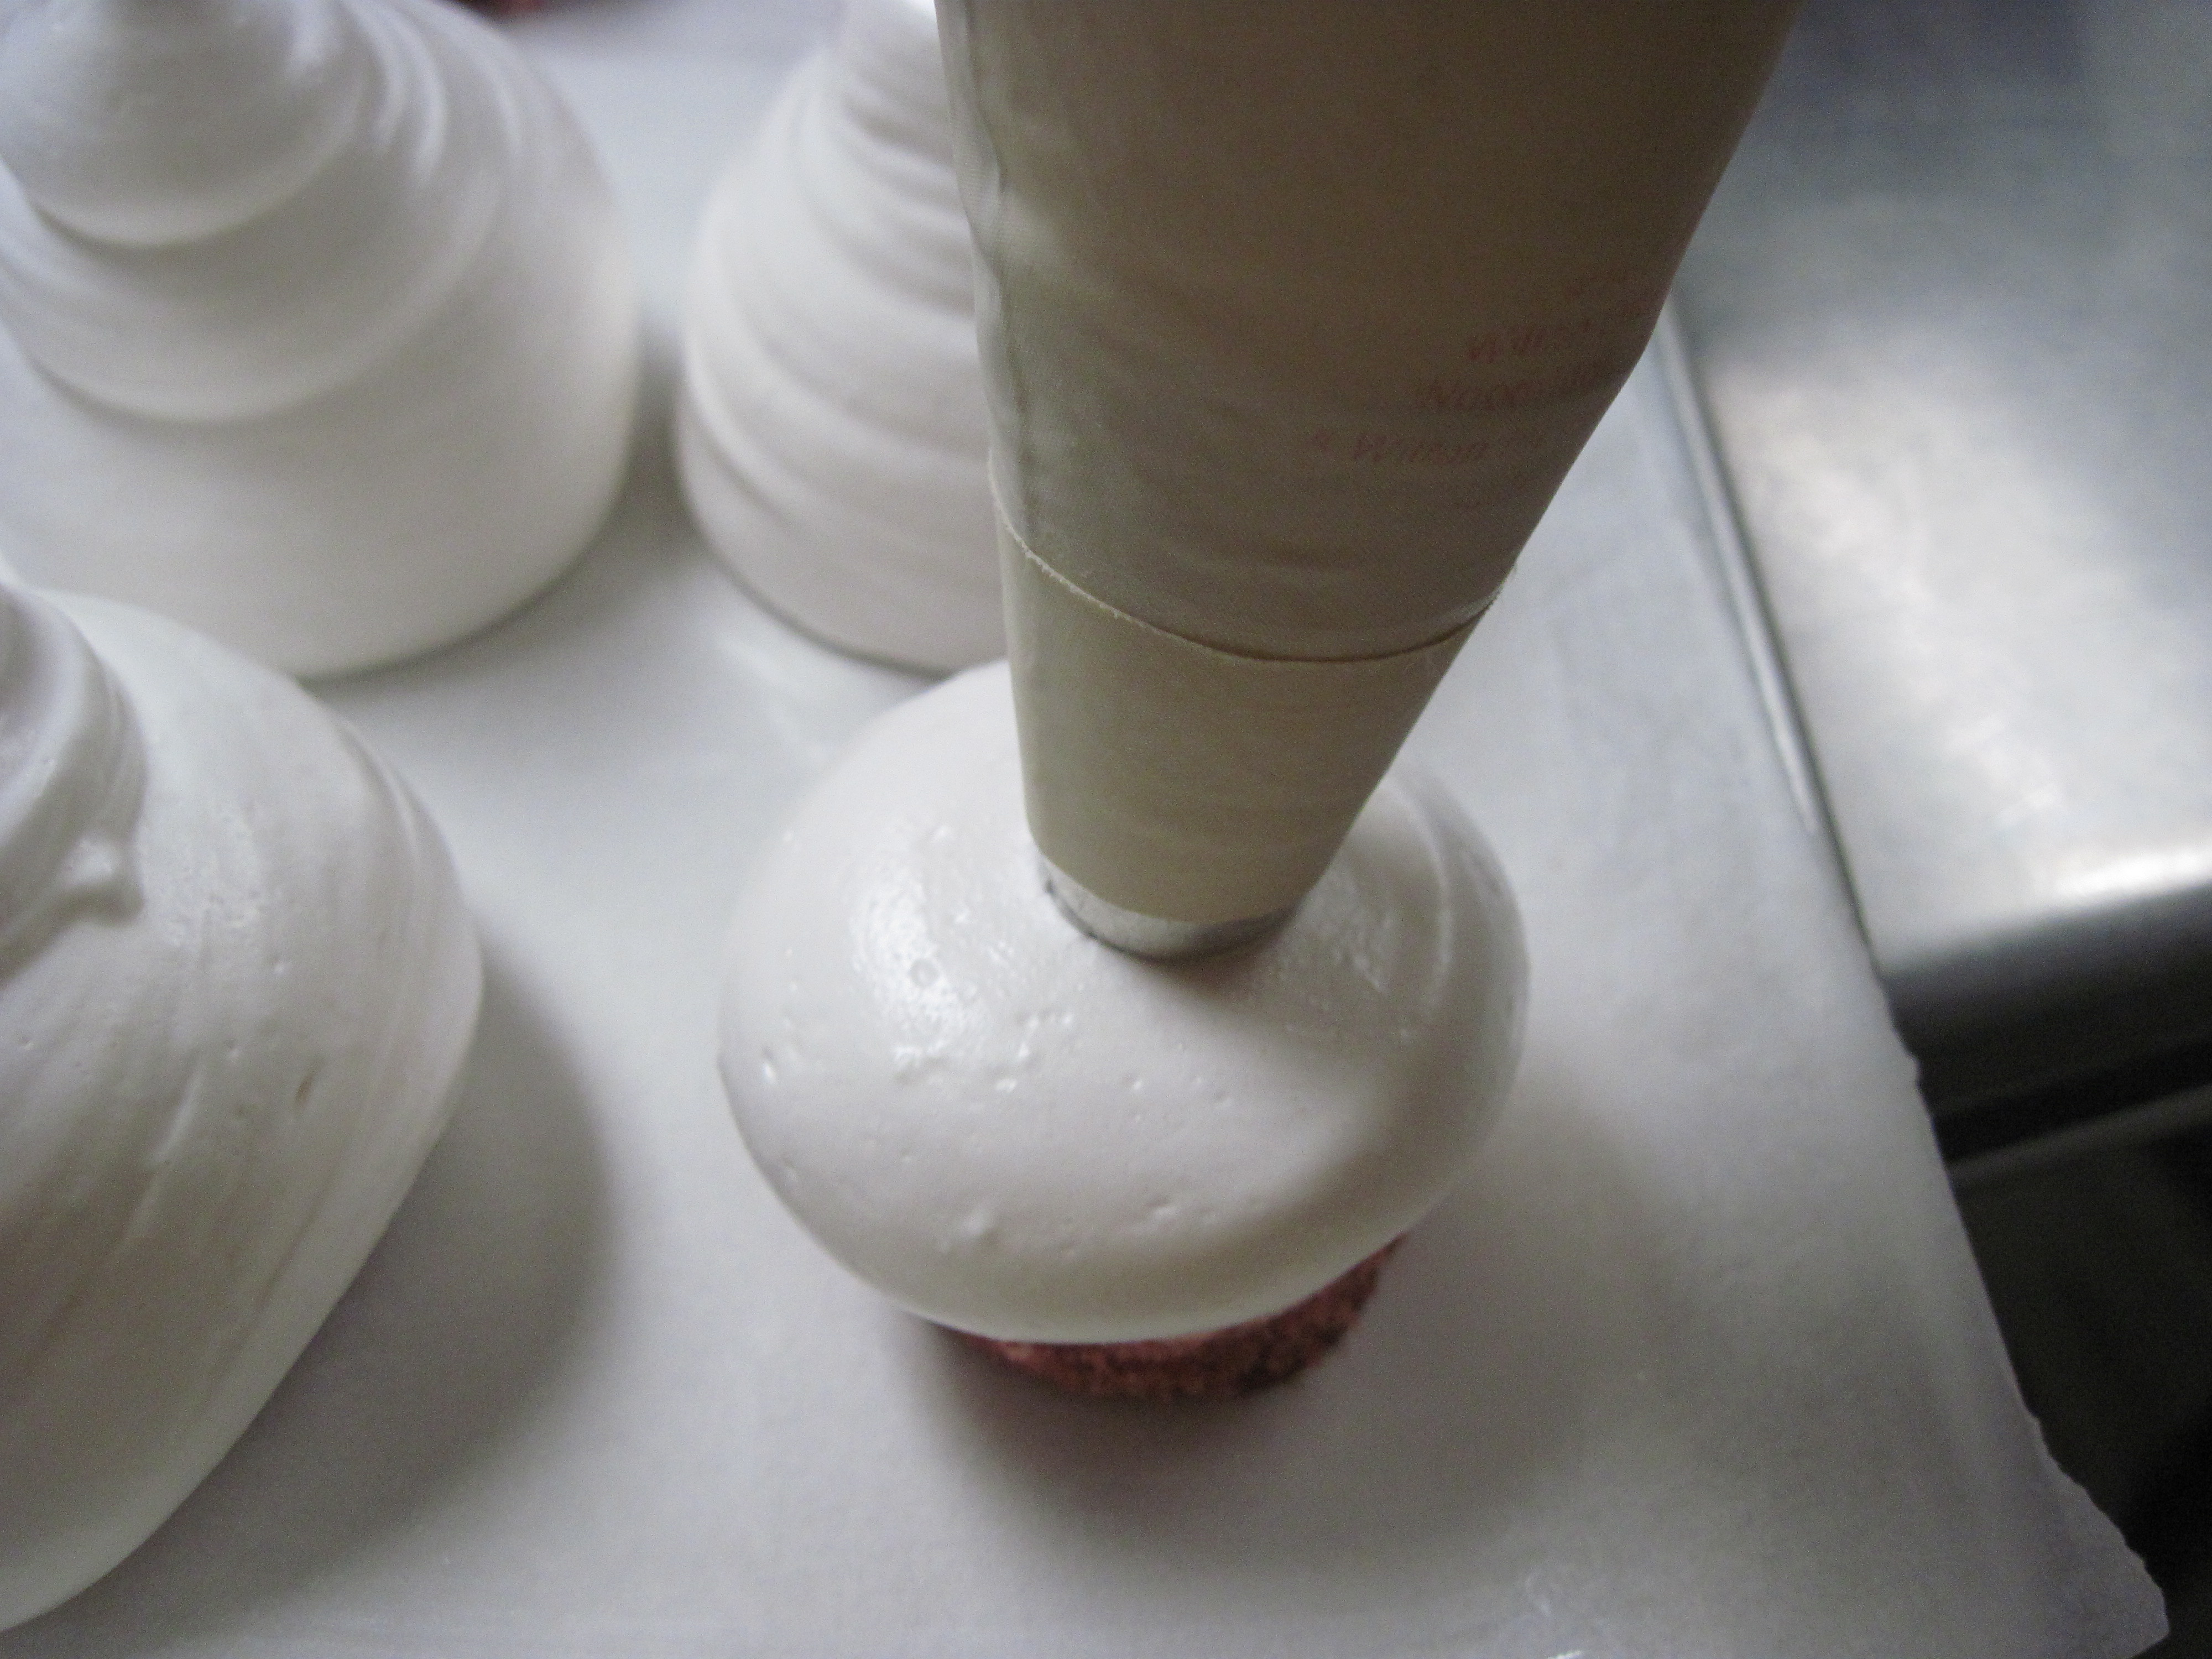 Start piping marshmallow until it falls over the sides of 